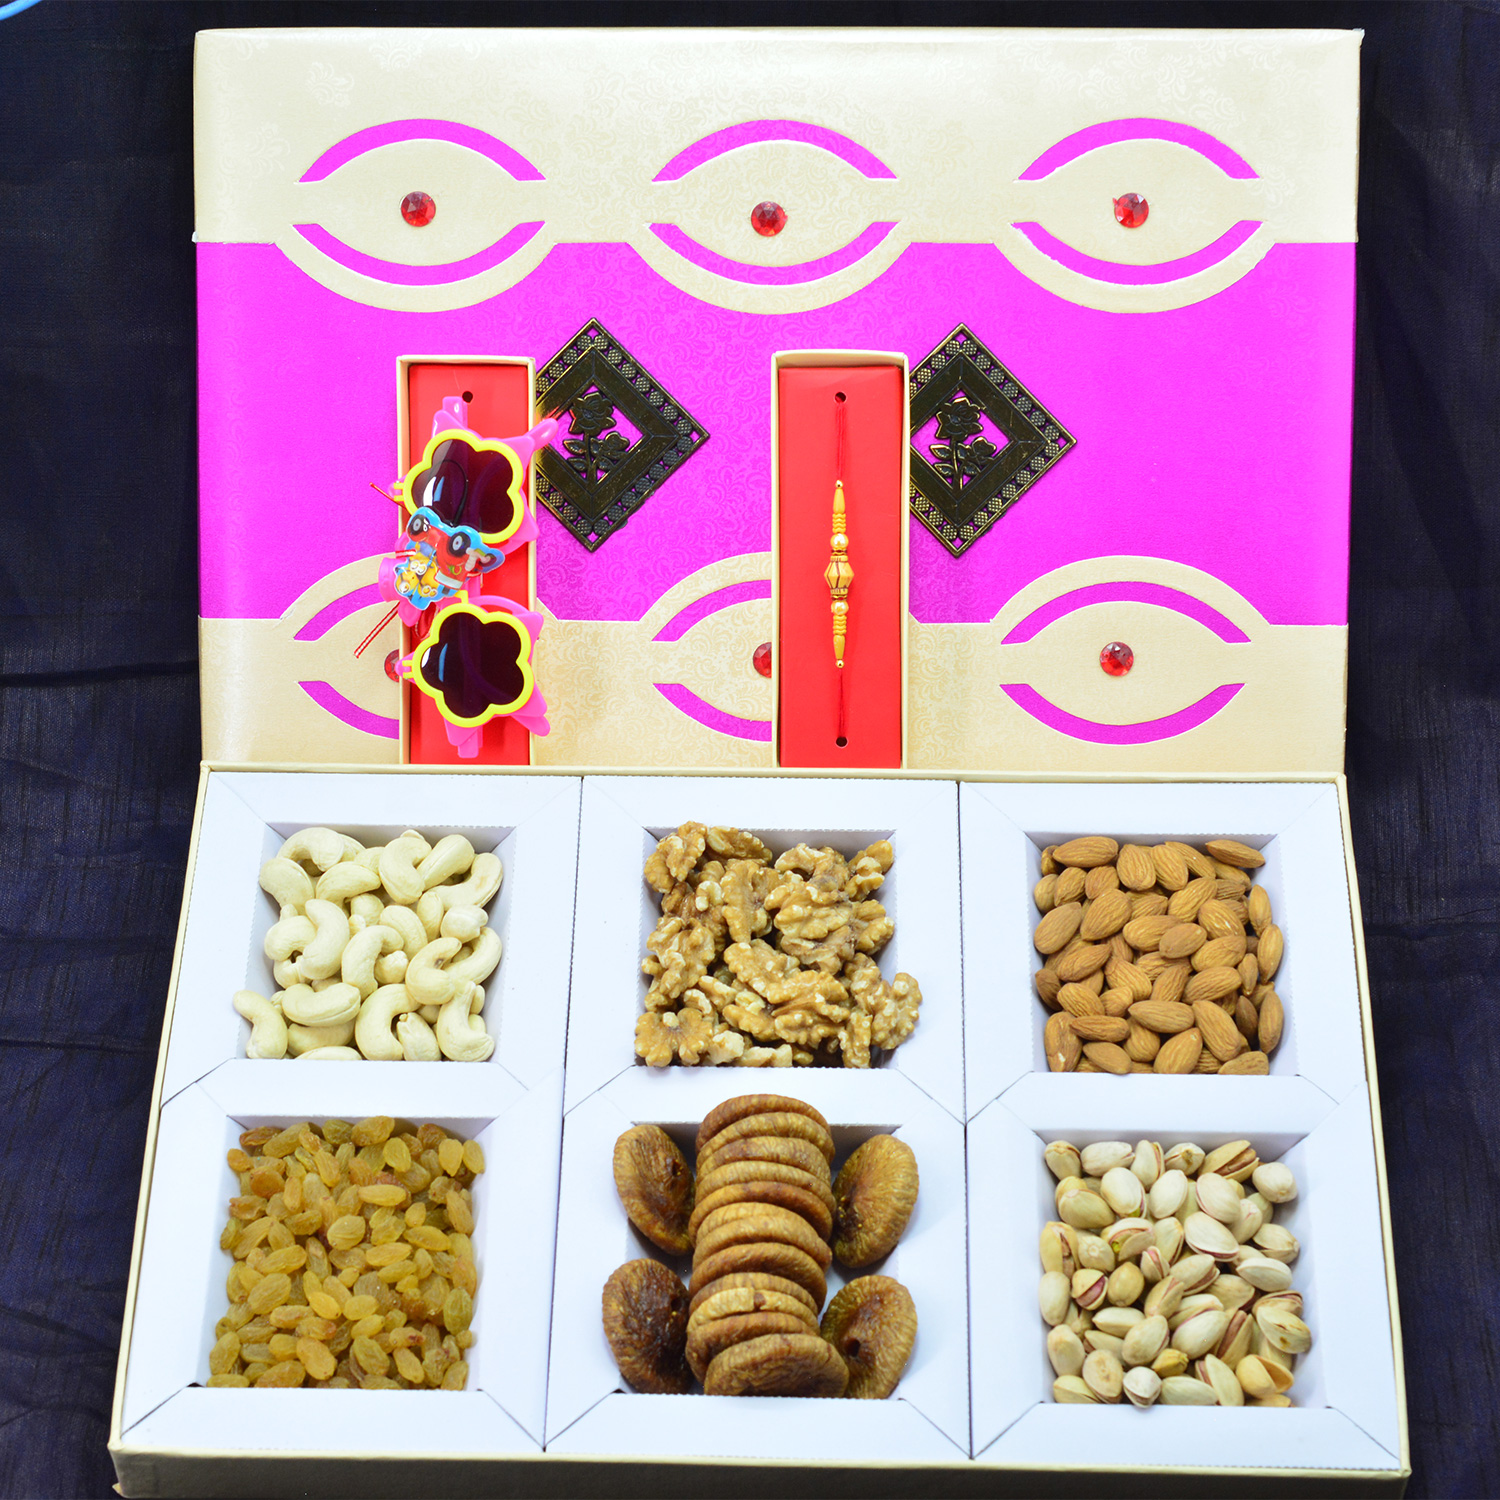 Goggles Kid Rakhi with Brother Mauli Rakhi and Special Dry Fruit Pack of Six